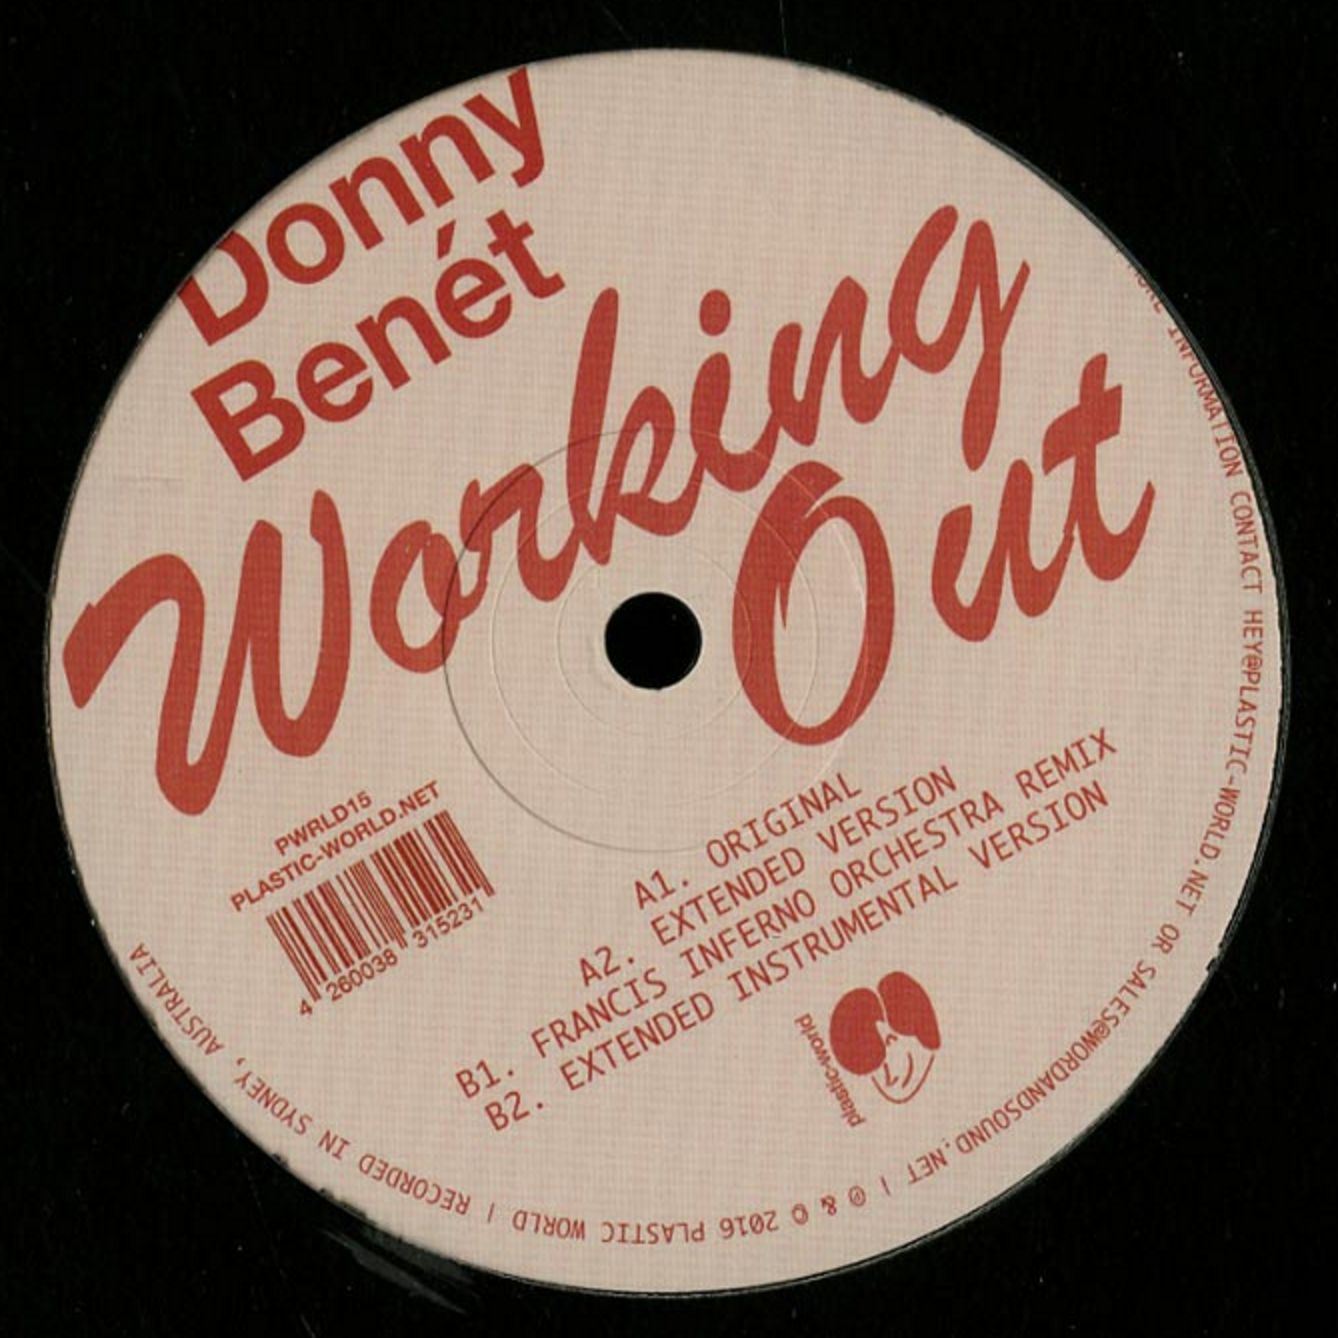 Soo dejiso Donny Benet - Working Out (FIO's Yarra Bend Reprise)